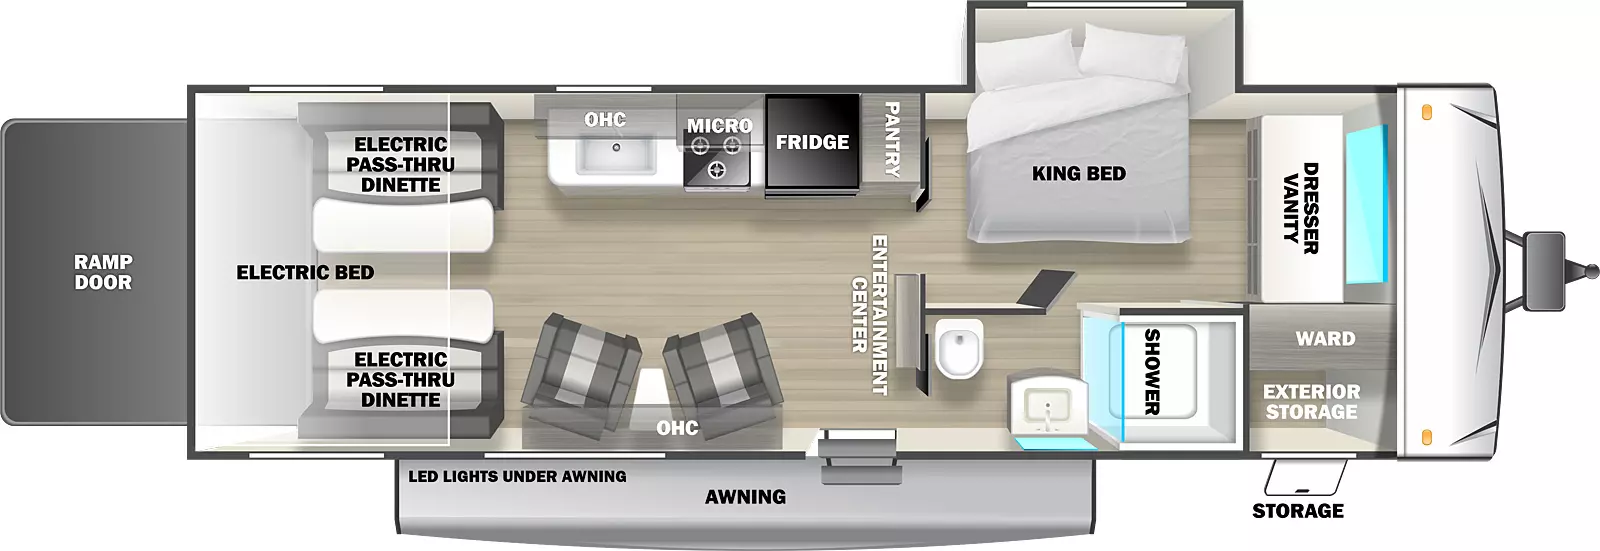 The Stealth QS2616G is a toy hauler travel trailer that has one entry door, rear ramp door, one slideout on the off-door side, 18' awning, and front storage on the exterior.  Inside, there is a bedroom in the front of the unit. A king bed is placed crosswise, with the head of the bed extending into a slideout; a dresser vanity with mirror; and wardrobe cabinet. There is a doorway into the bathroom and a separate door into the main living area. The bathroom contains a tub shower, sink, and commode, and has a second door that opens into the main living area. There is a partial wall located between the bedroom and bathroom doors, with an entertainment center and TV that faces the rear of the unit. The kitchen is located on the off-door side, with a pantry, double door refrigerator, stovetop and oven, and sink, with cabinets and a microwave oven mounted overhead. Additional overhead cabinets are mounted on the door side, with a pair of upholstered chairs and small table located underneath. In the rear of the unit are two flip sofa benches, one on either side, with a split dinette table between them. These convert to a standard electric bed. This trailer provides 16' of interior cargo space.